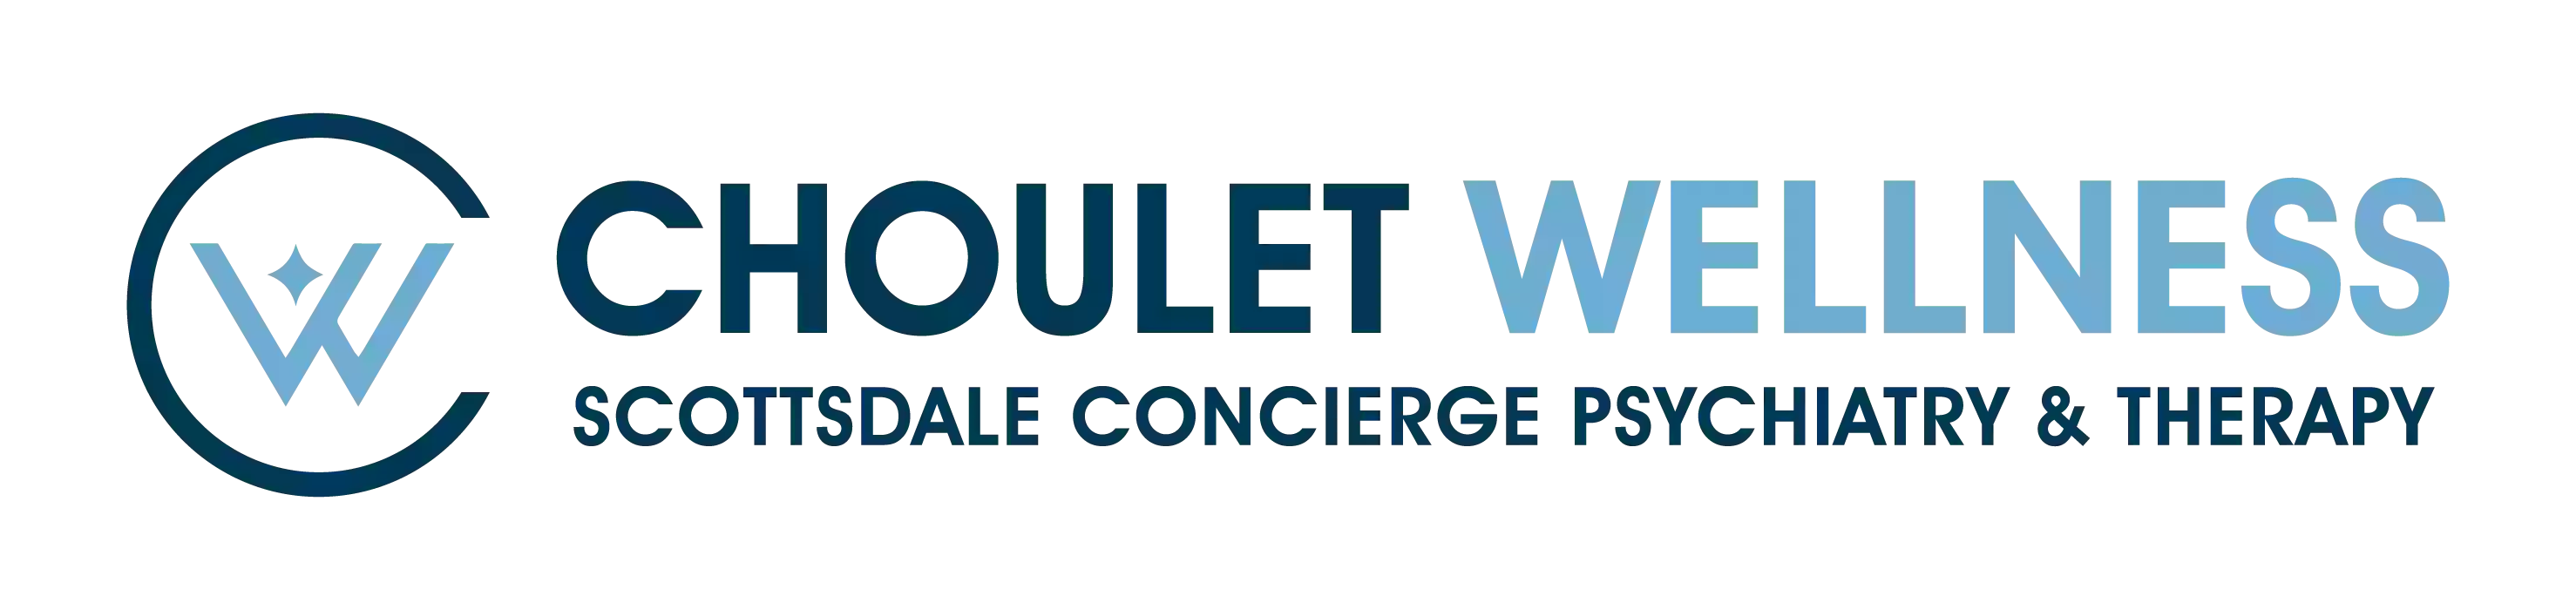 Choulet Wellness: Scottsdale Concierge Psychiatry & Therapy (Paradise Valley)